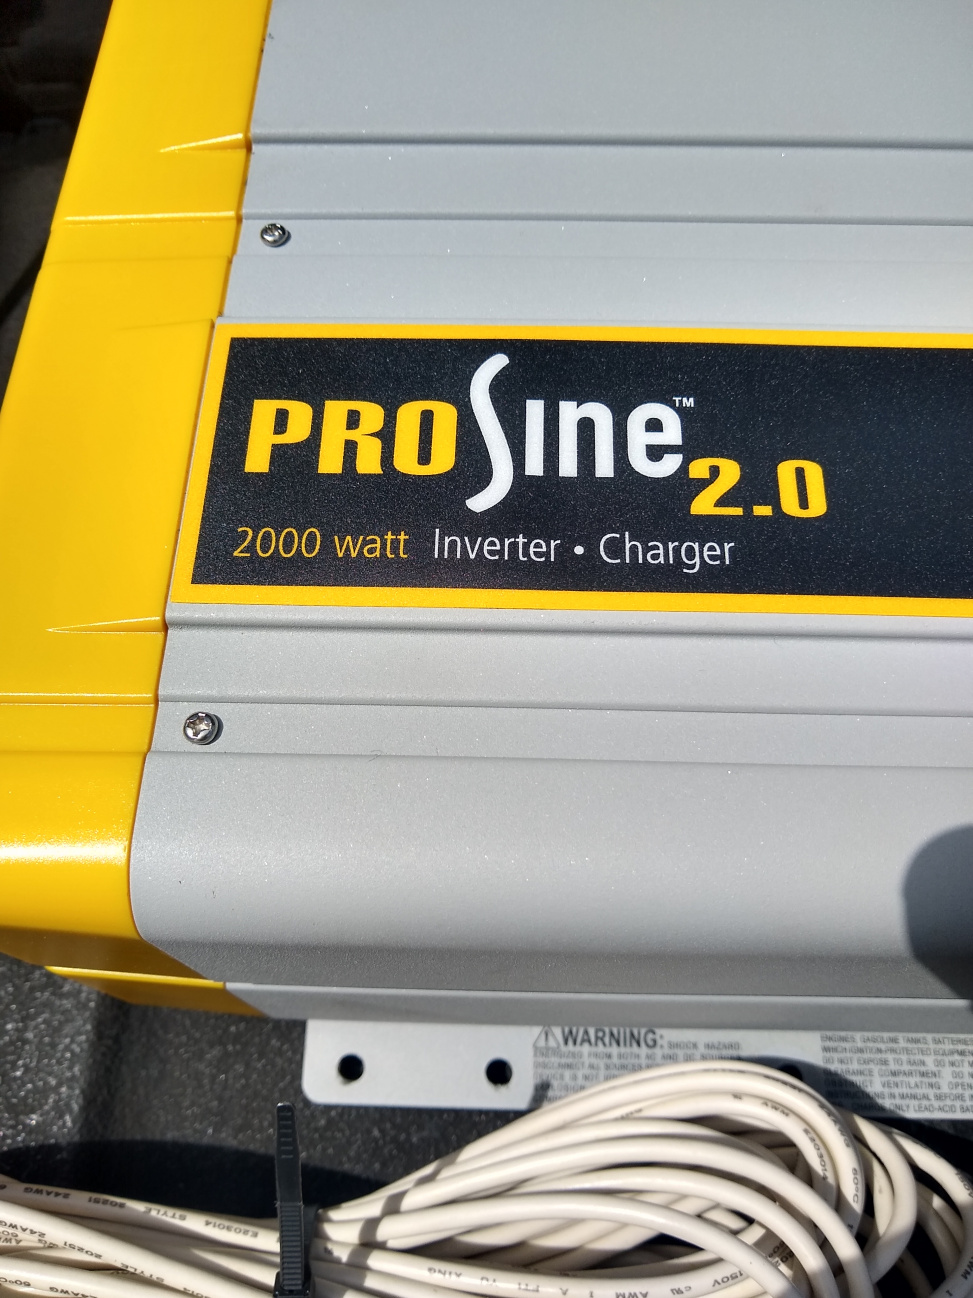 SOLD] Xantrex Prosine 2.0 Charger/Inverter - Cruisers & Sailing Forums